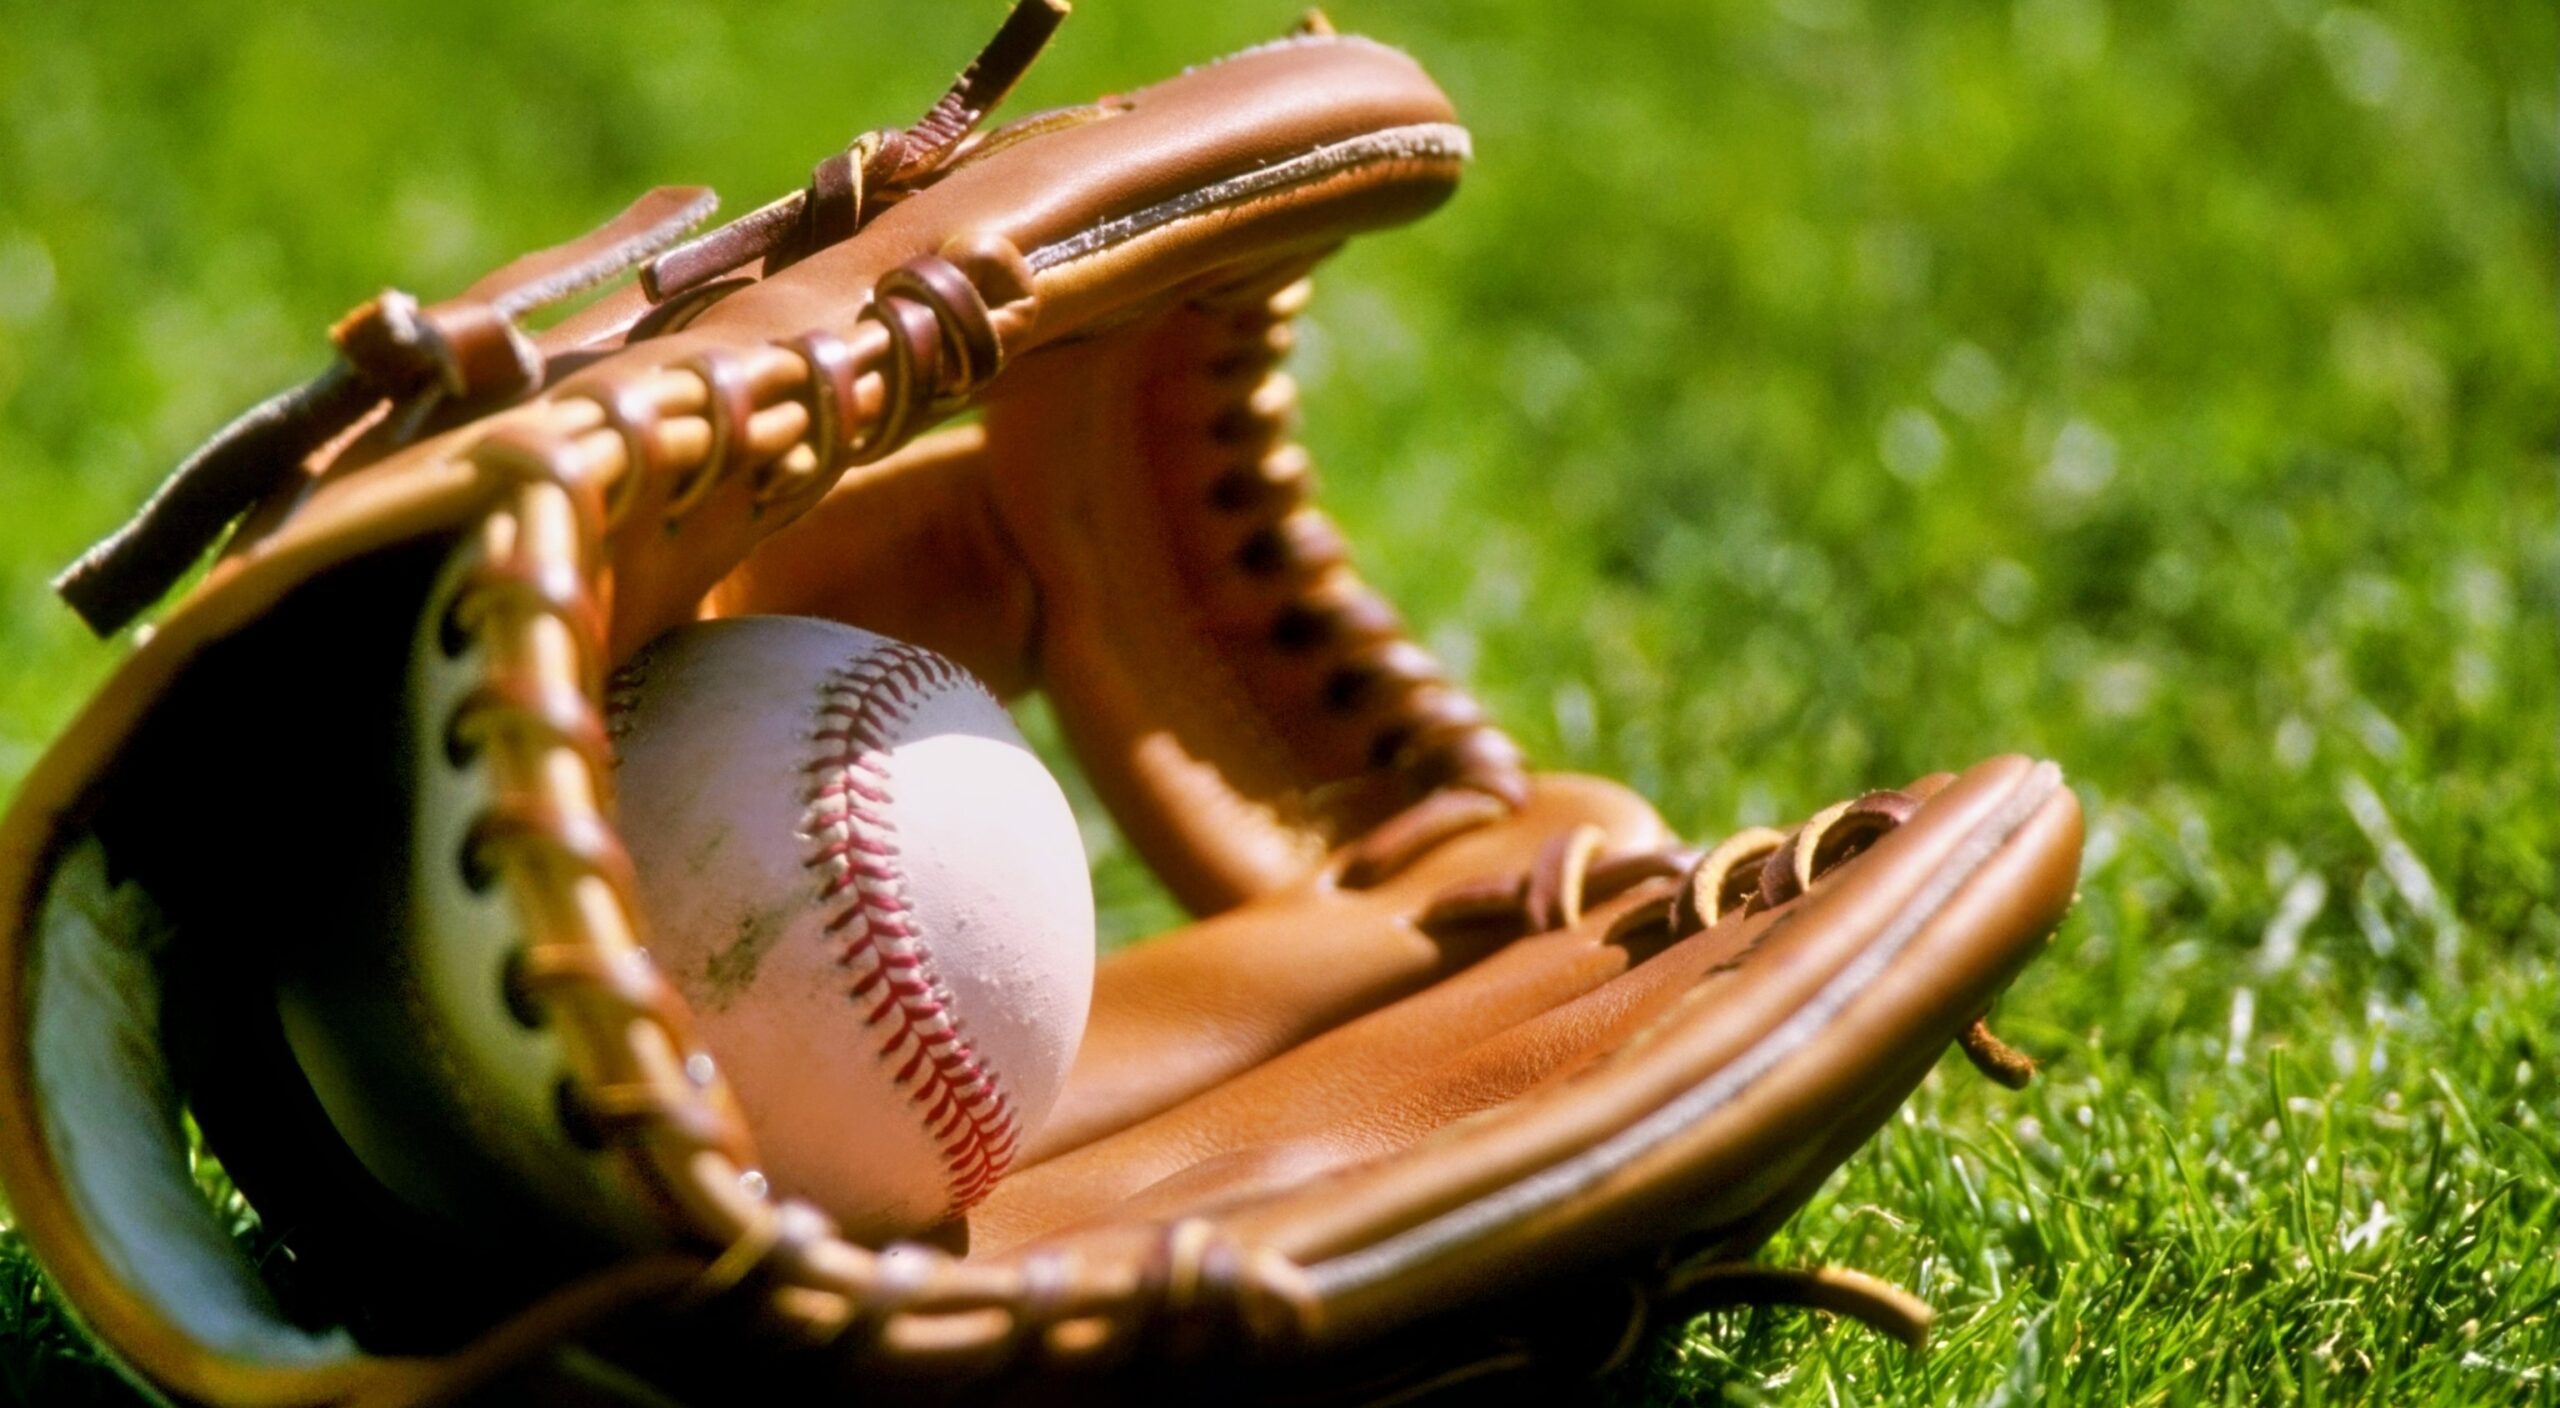 Texas college baseball player hit by stray bullet during game